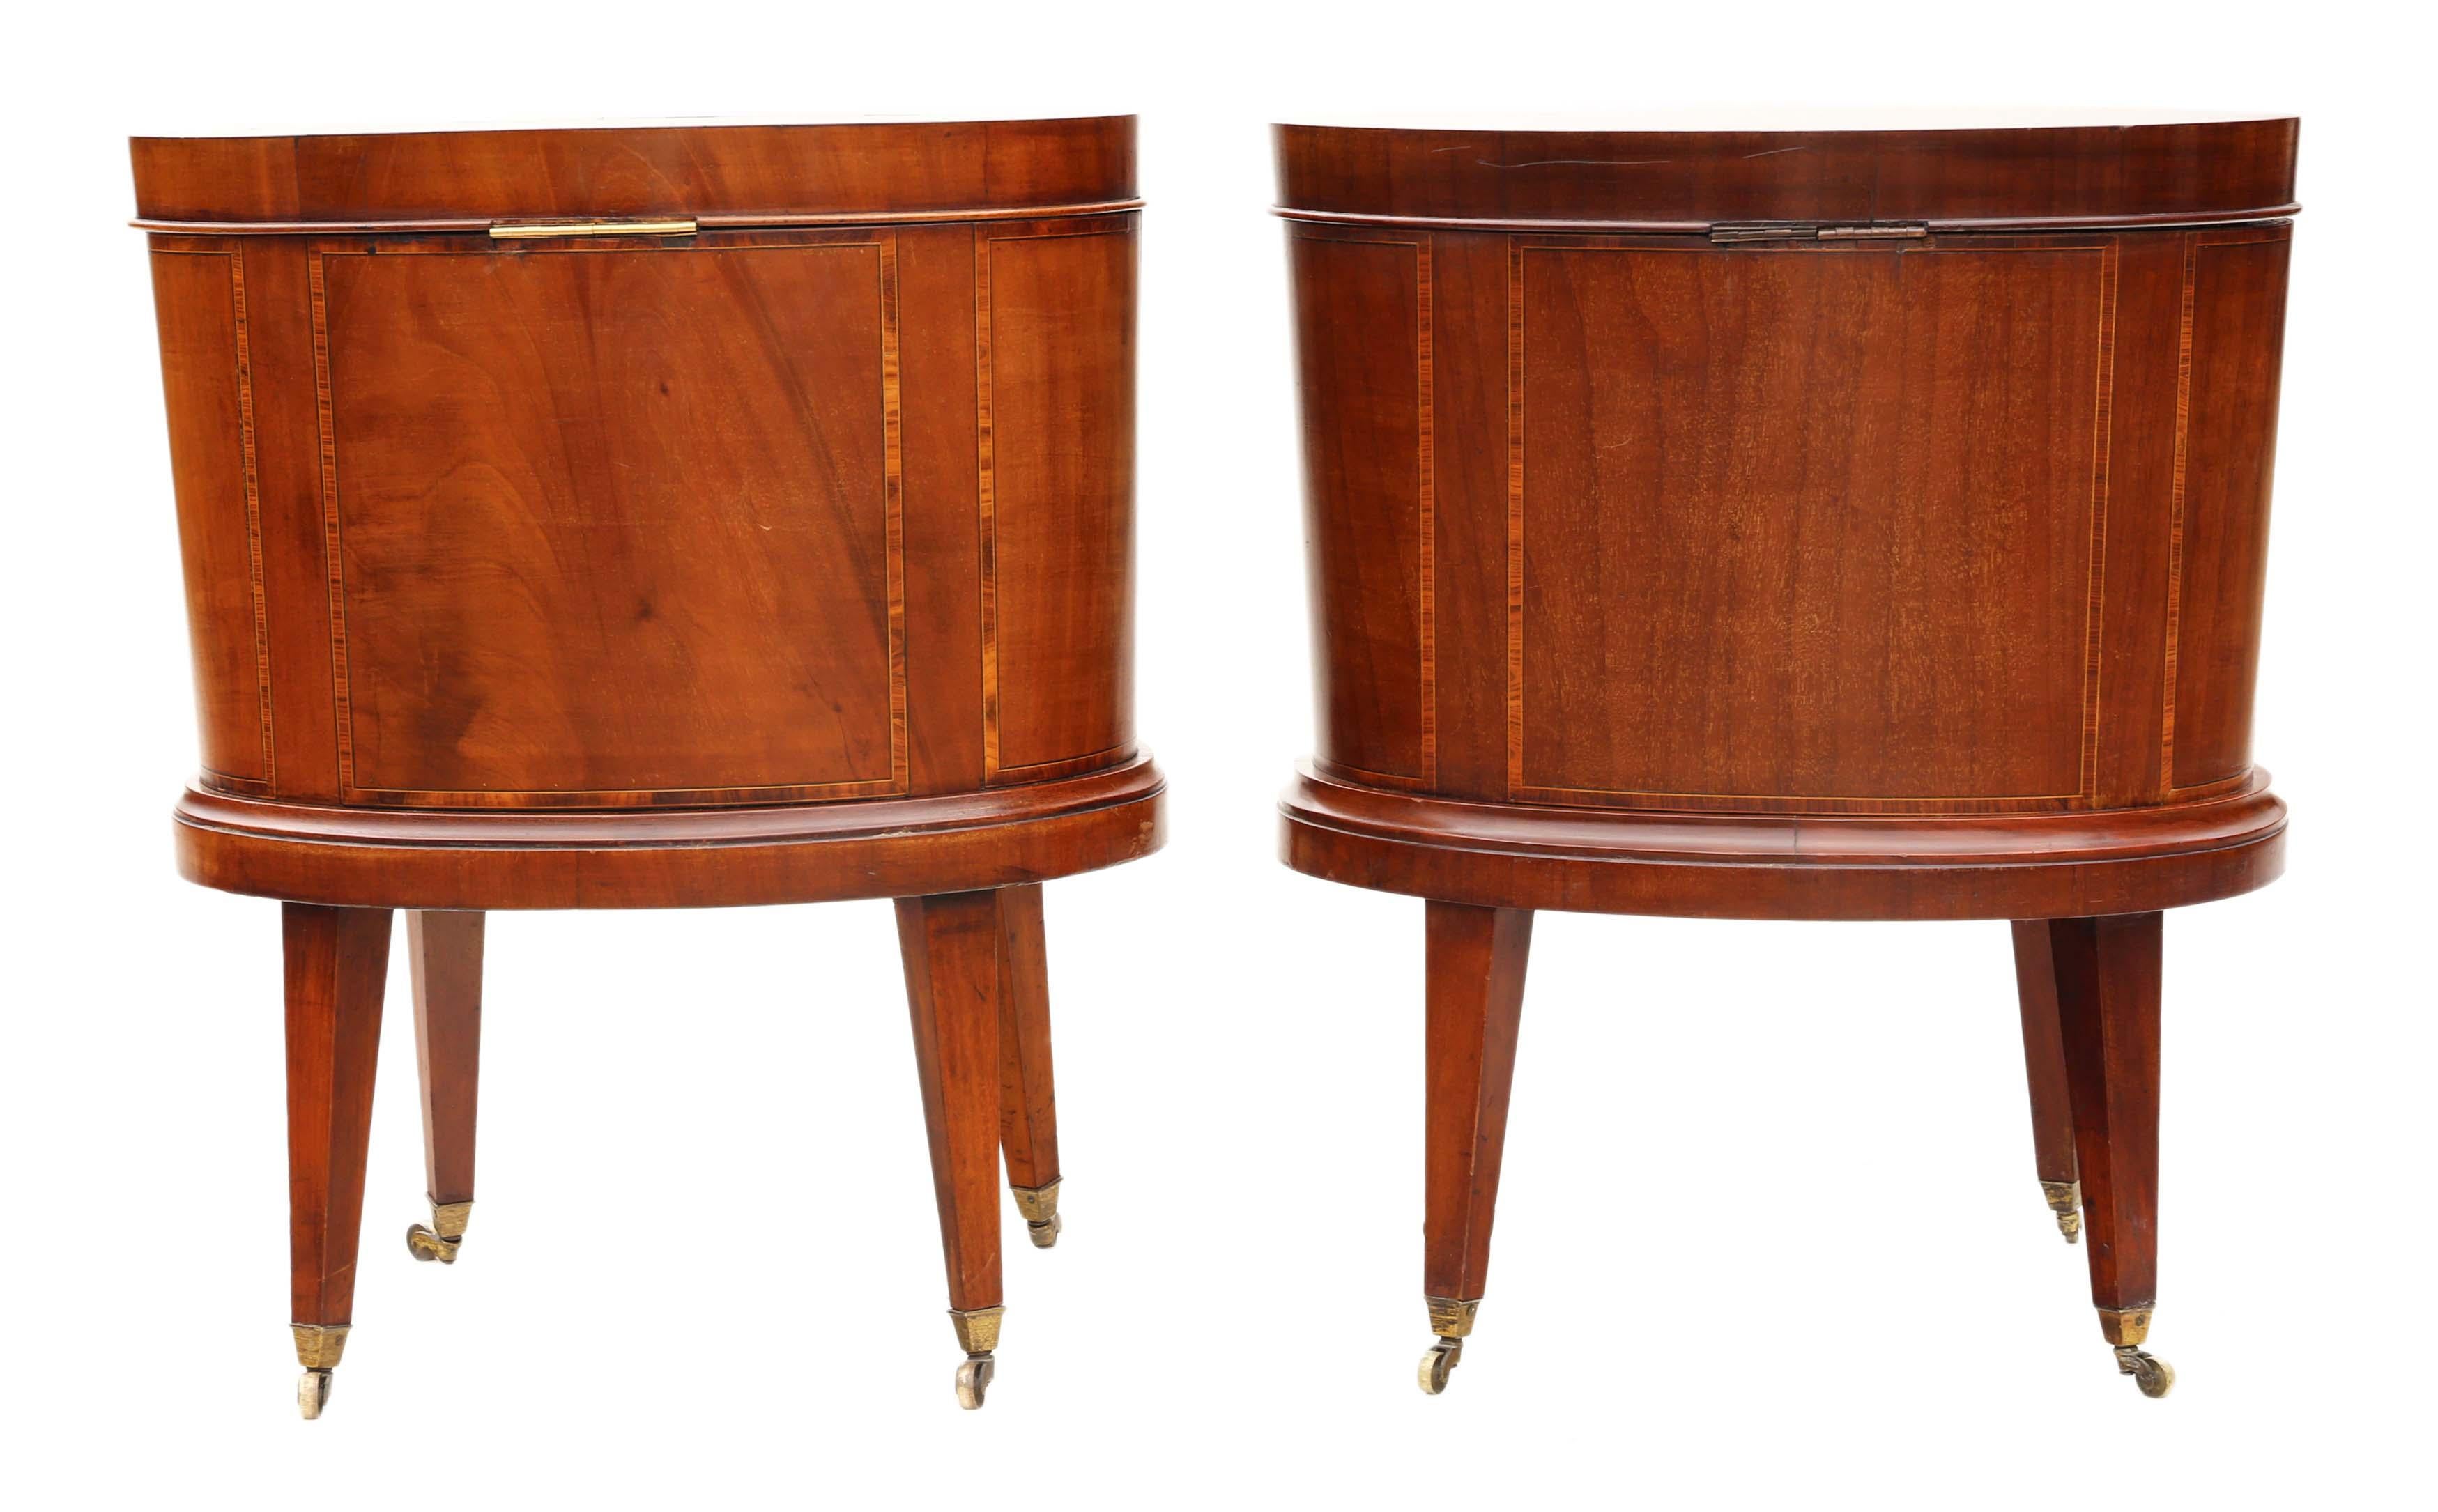 19th Century Antique Georgian Revival Pair of Inlaid Mahogany Cellarettes Cupboards Cabinets For Sale